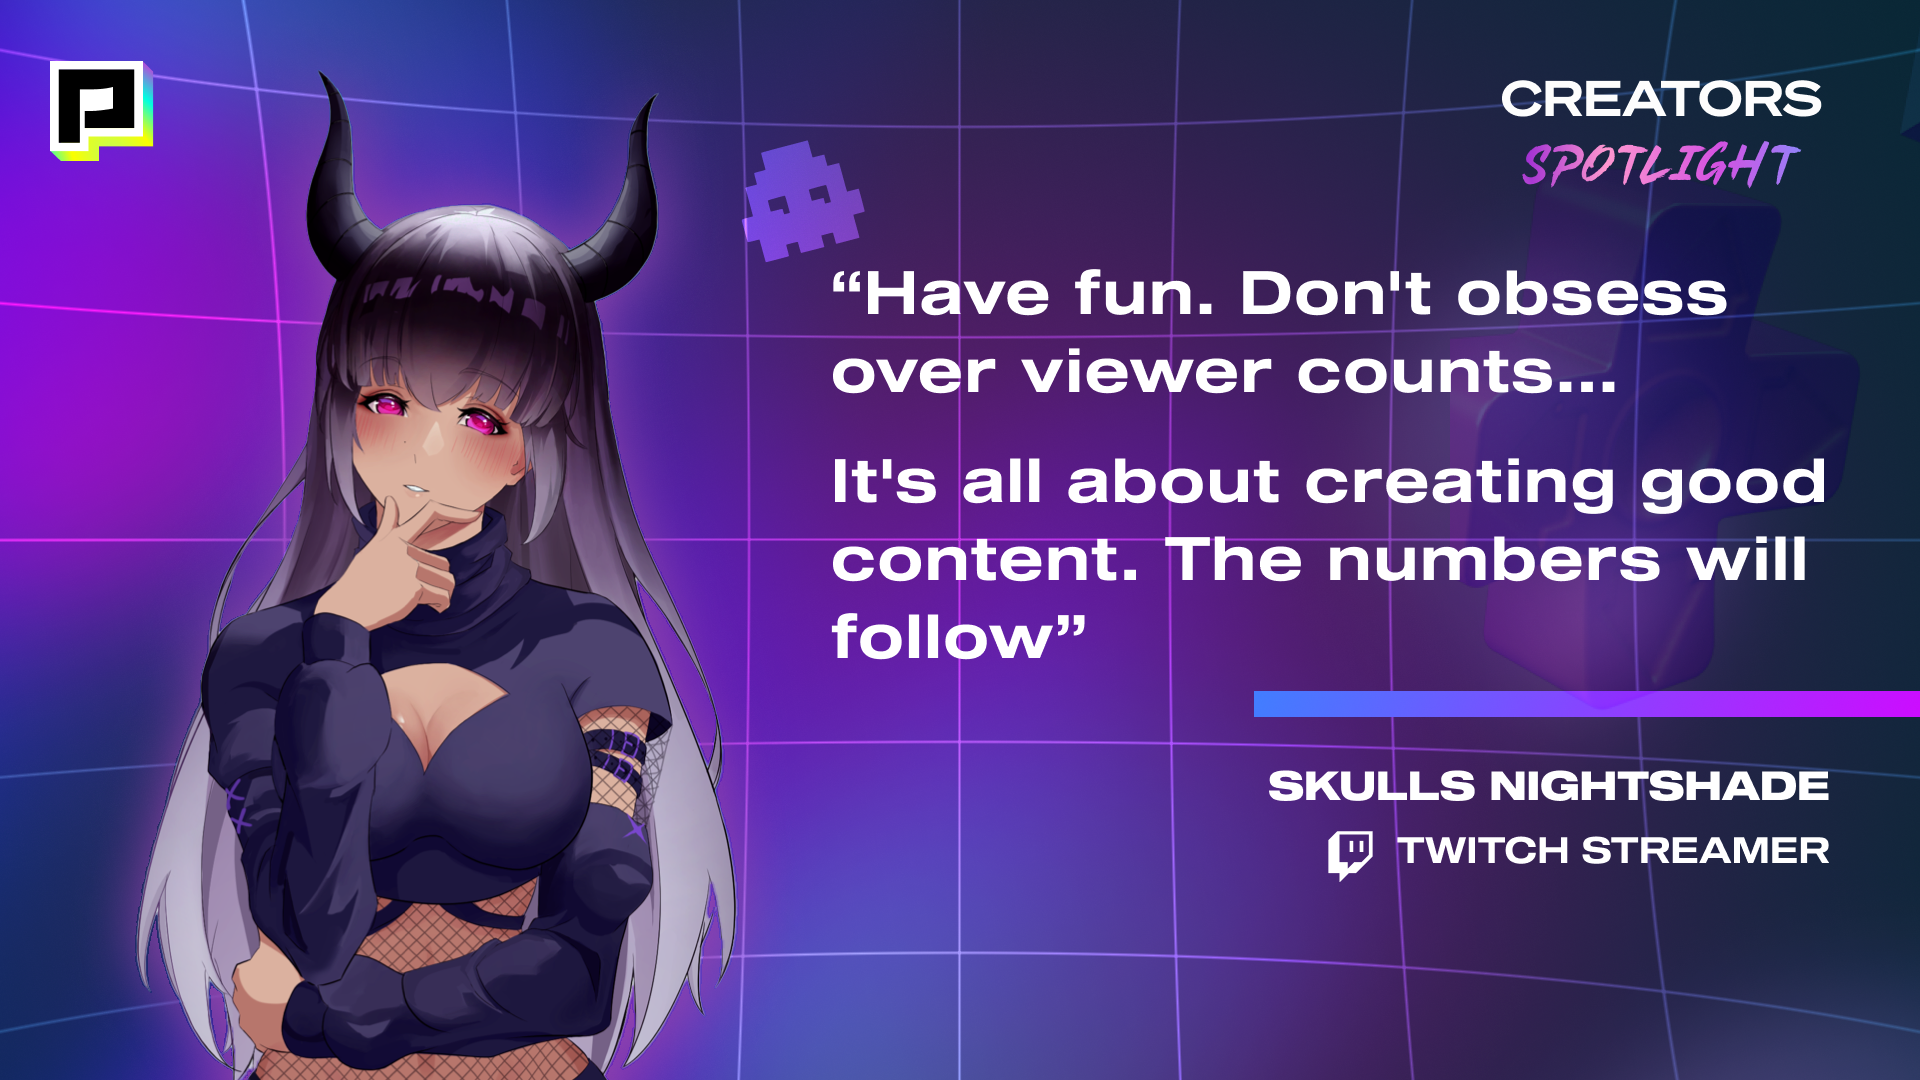 Image of Twitch Streamer, SKULLS NIGHTSHADE with their quote, "Have fun. Don't obsess over viewer counts...It's all about creating good content. The numbers will follow"